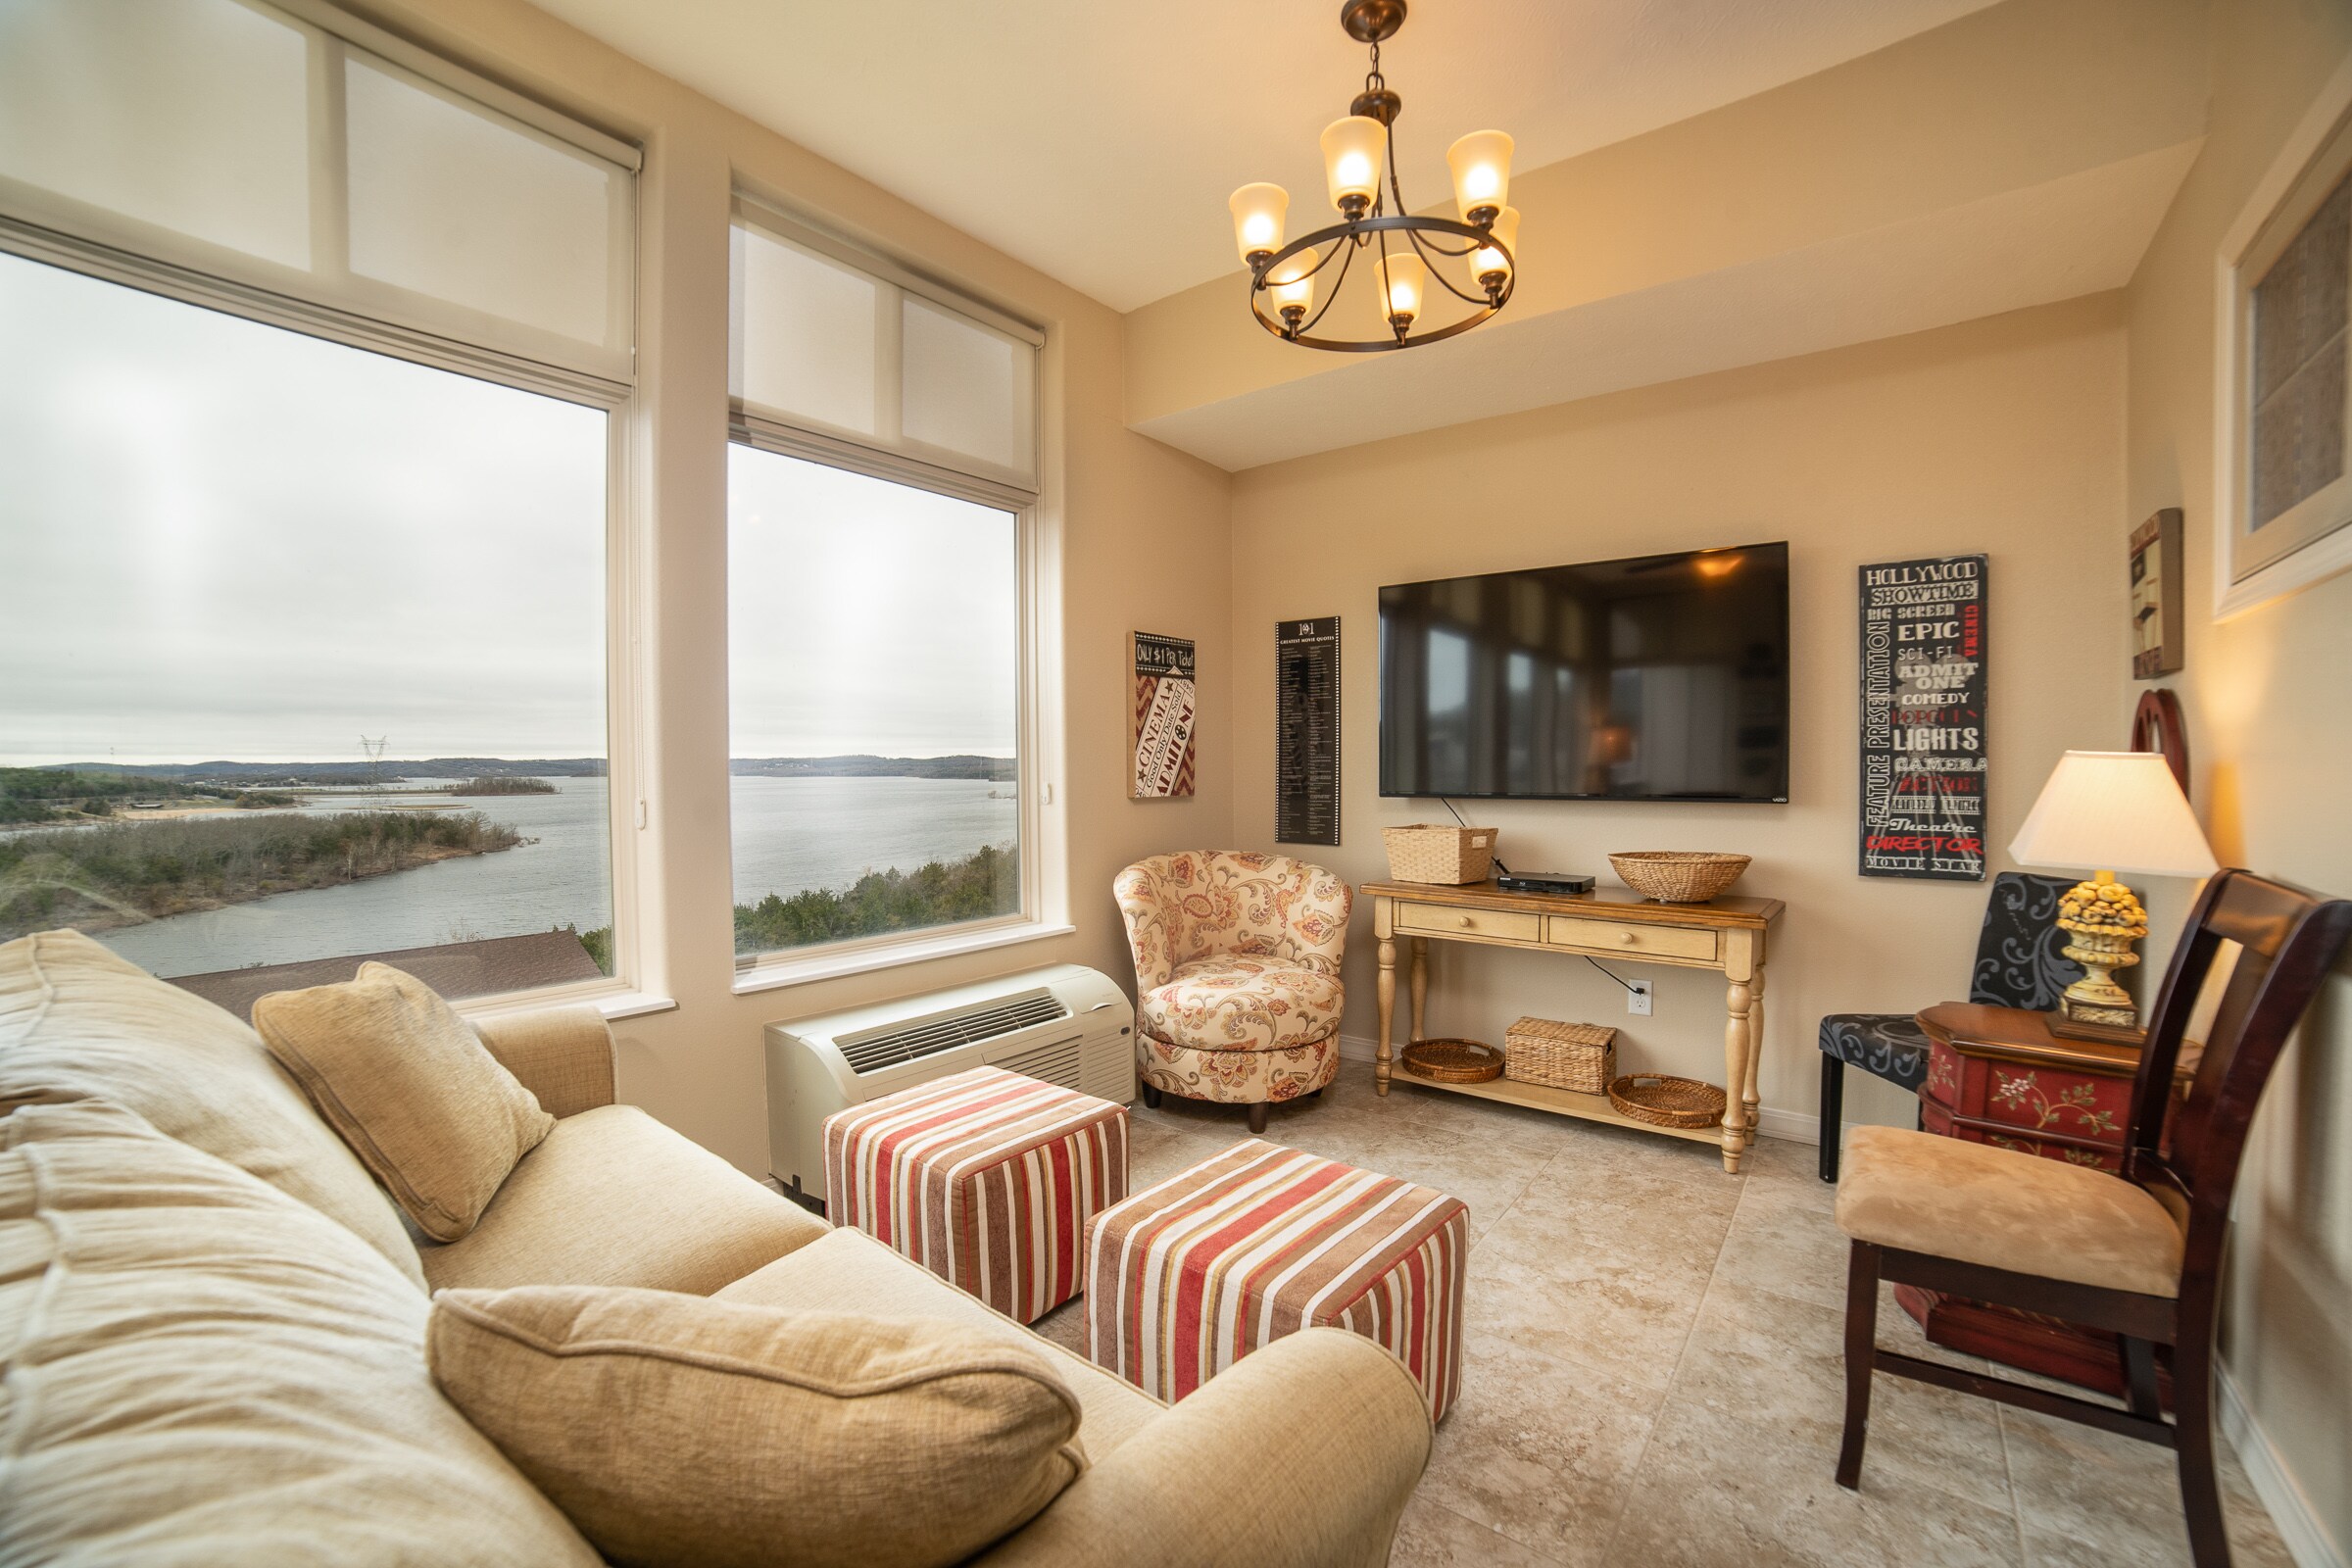 Enjoy the beautiful lake view from the comfortable all-season sunroom